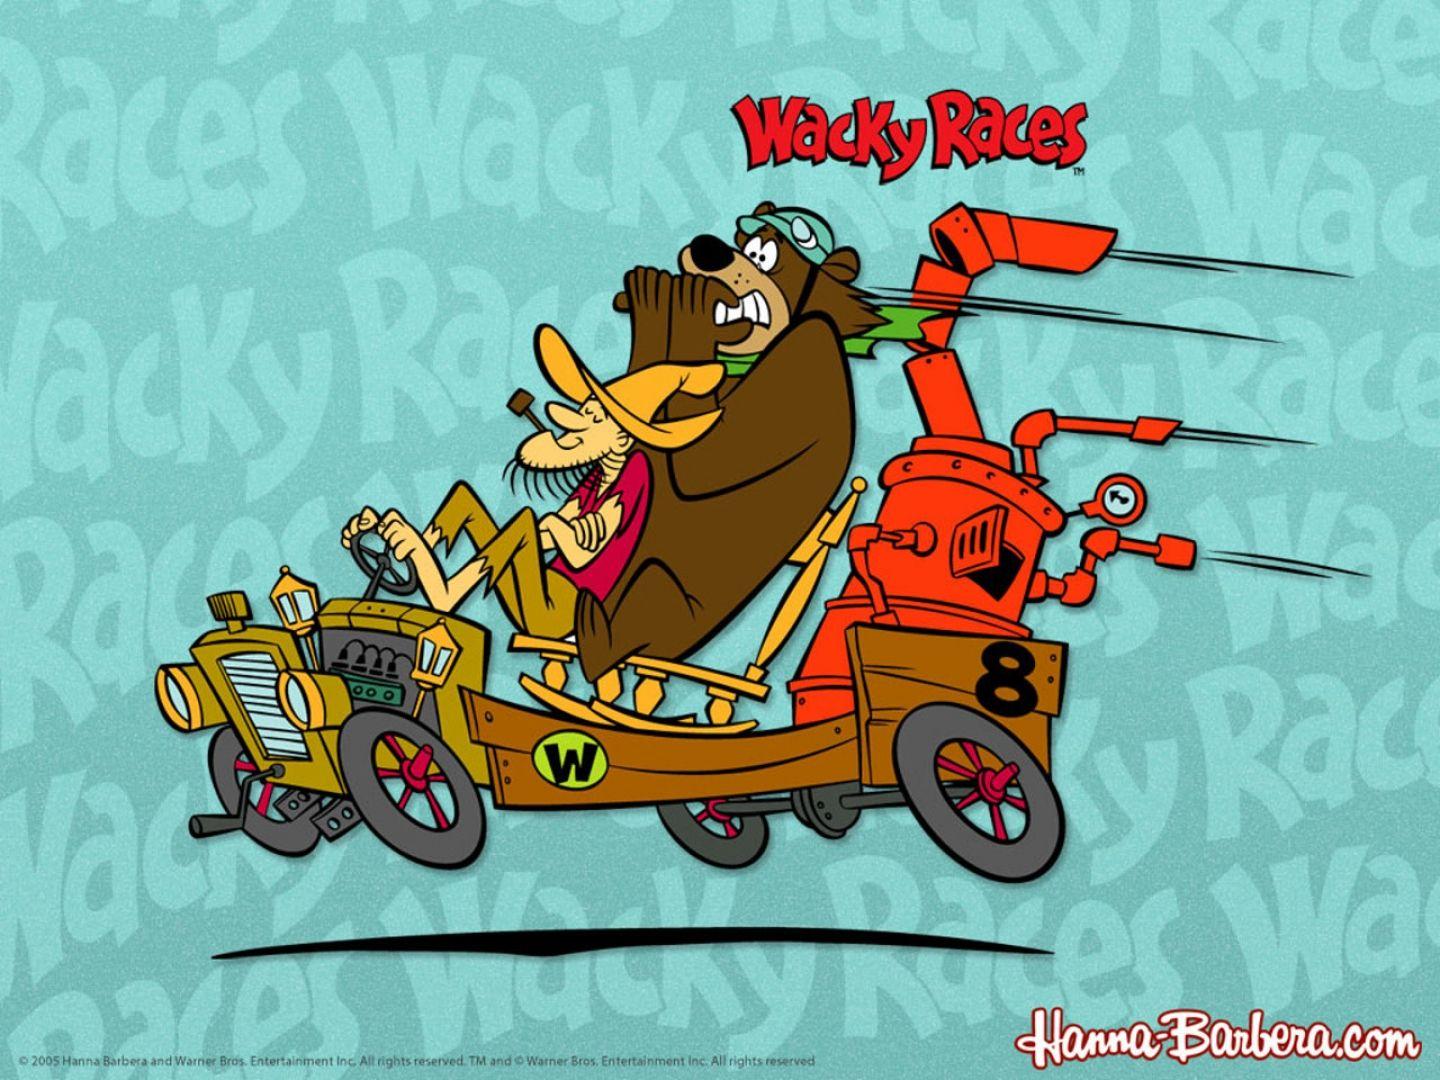 wacky races Wallpaper and Background Imagex1080